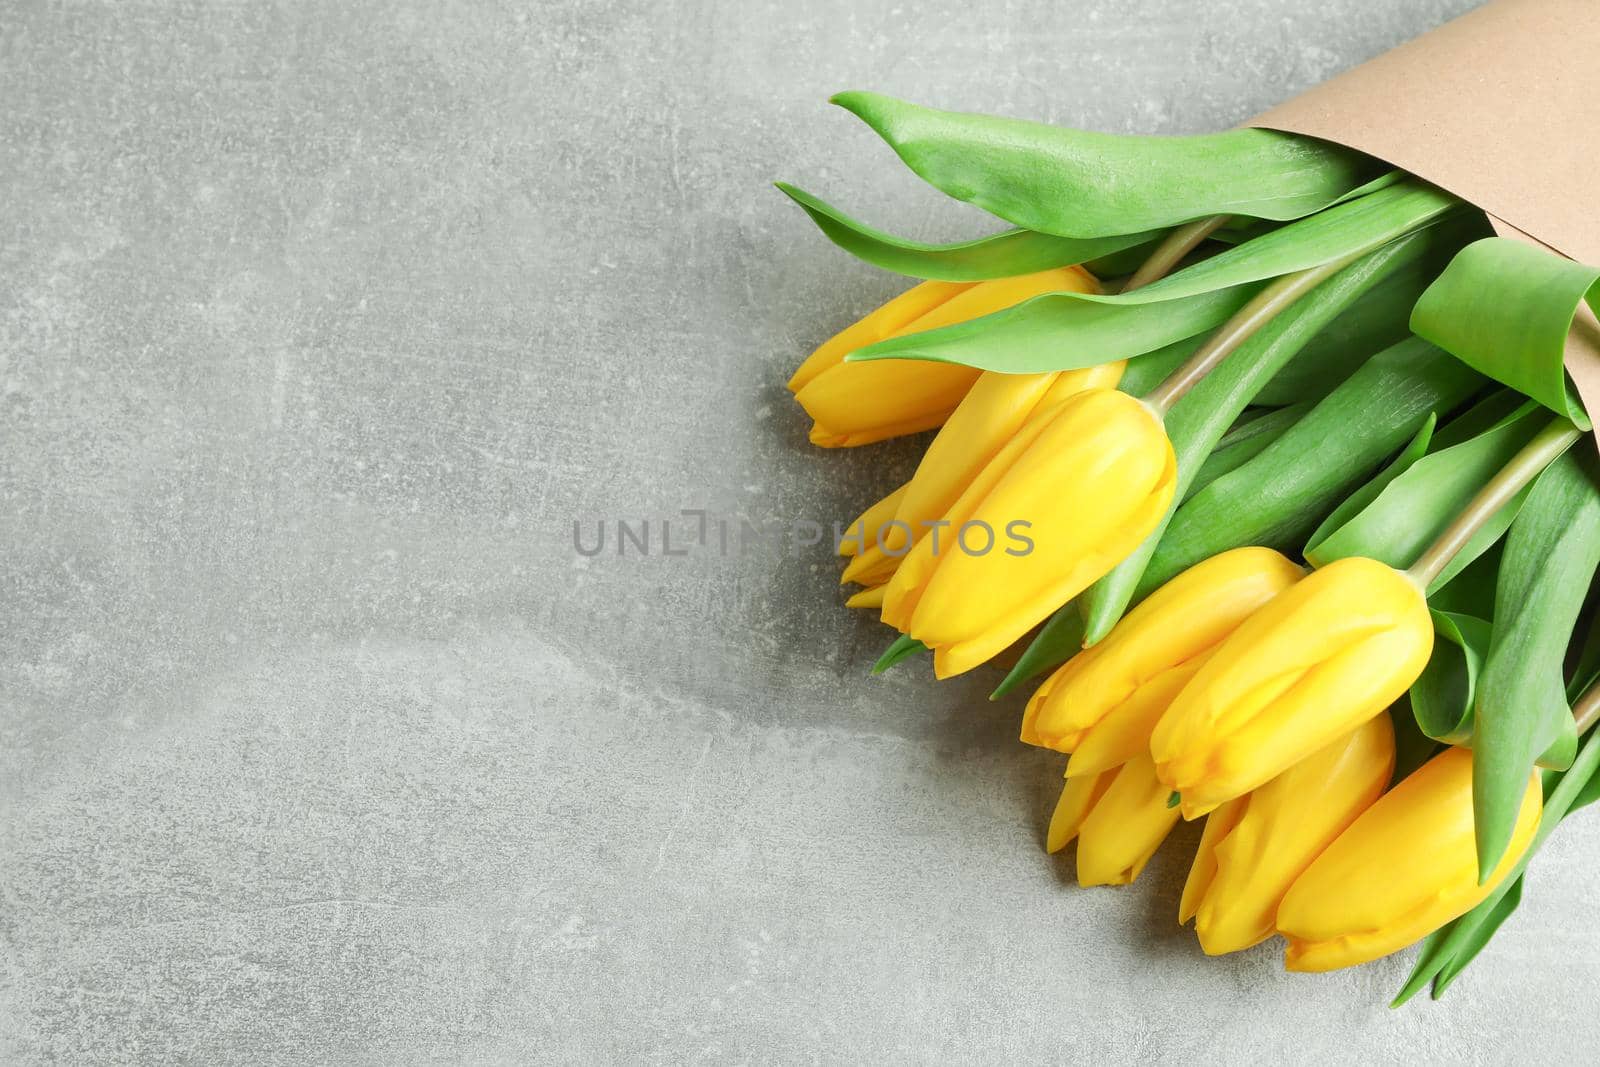 Beautiful bouquet of yellow tulips on grey background, top view. Space for text